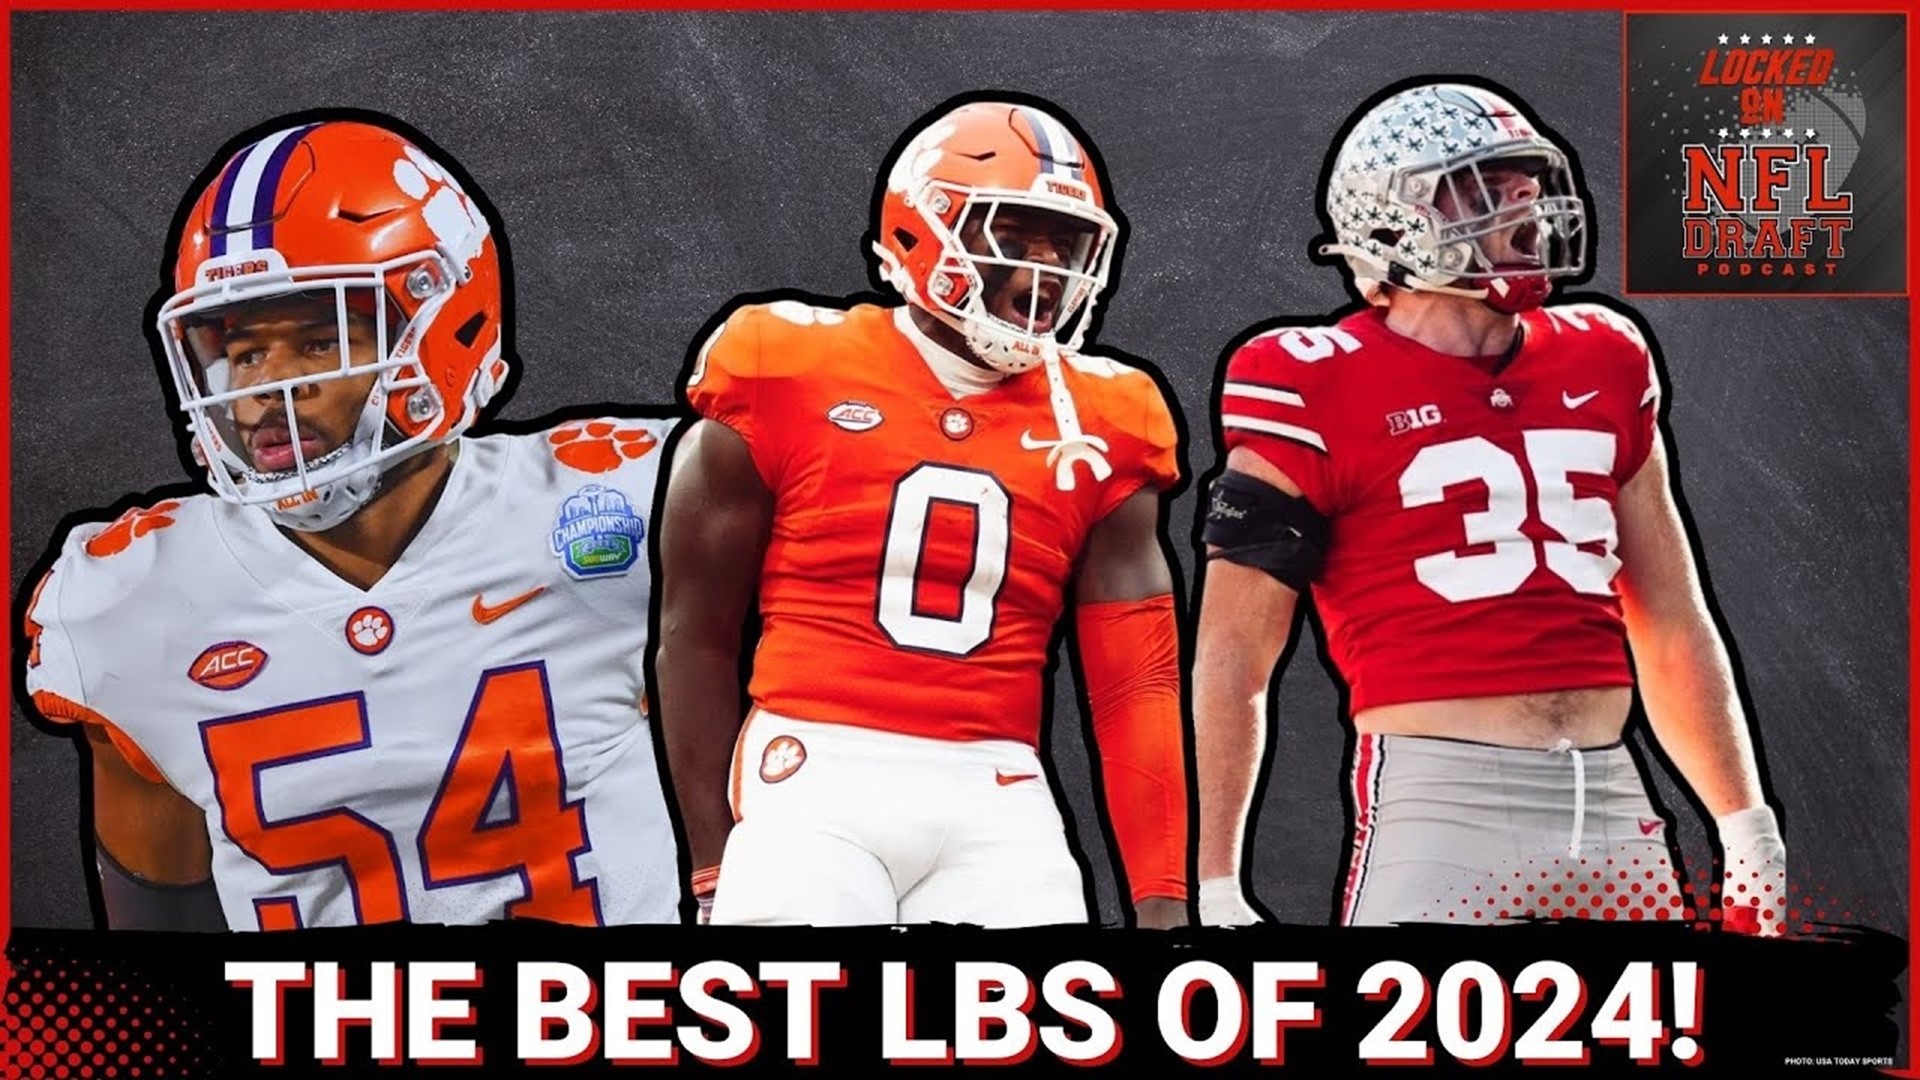 The scouting notebooks for the 2024 NFL Draft are still open. DP and Keith discuss the linebacker position. Who are the best linebackers in college football?